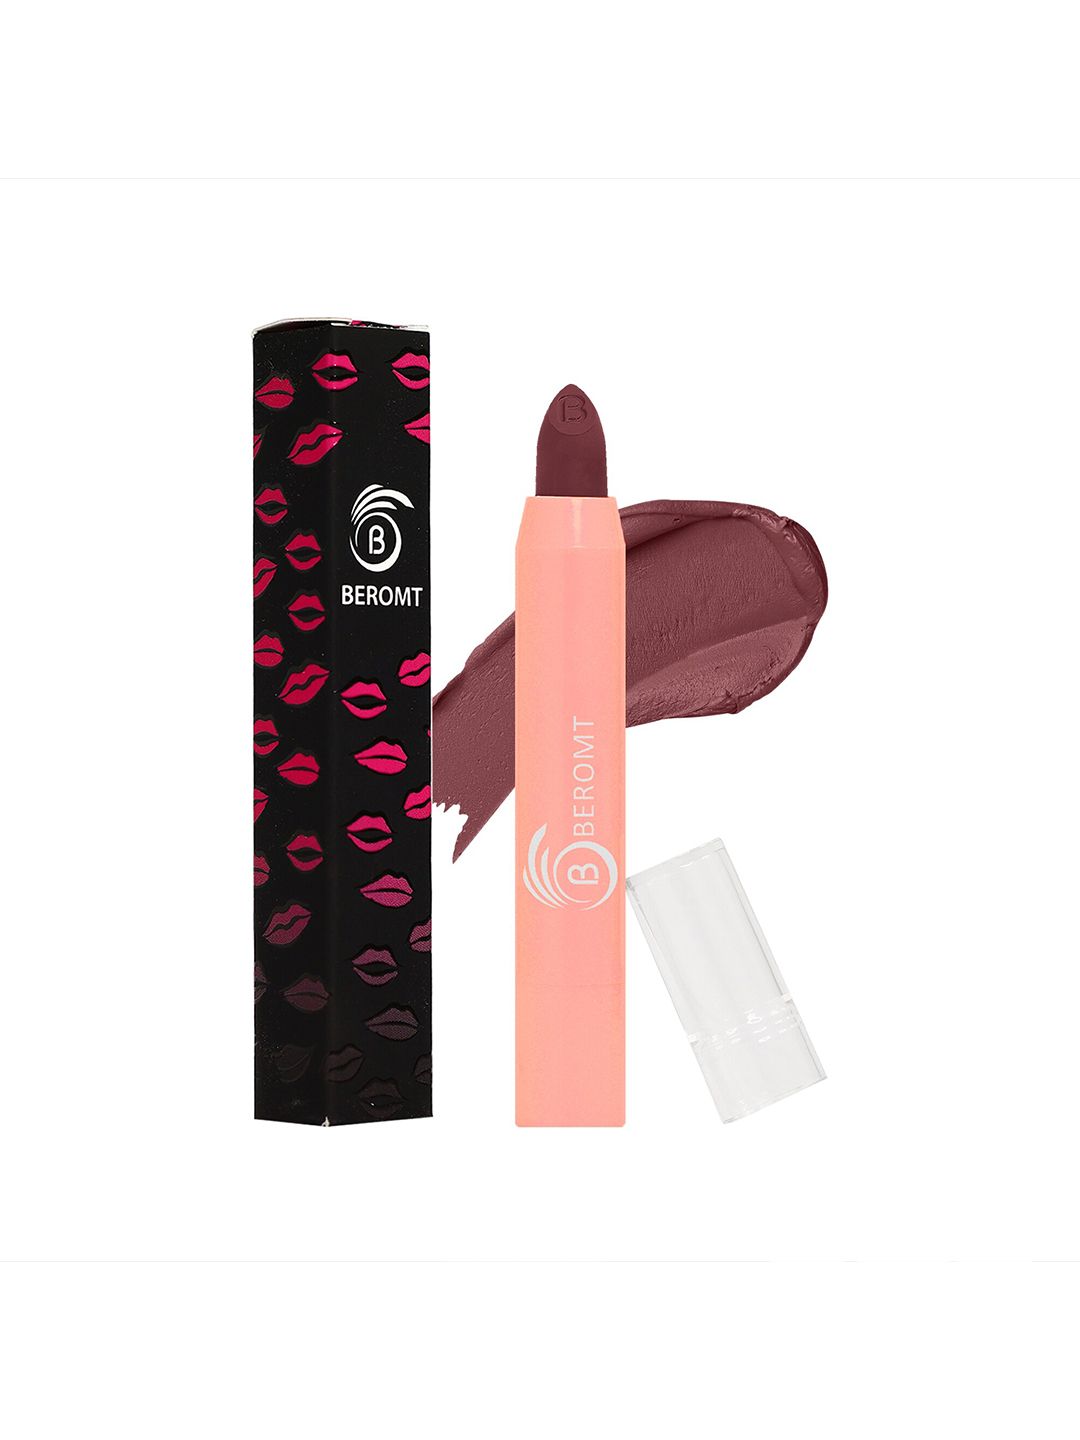 BEROMT Smudge Proof Perfect Pout Long-Lasting Matte Lip Crayon - Soft & Sultry BLC04 Price in India